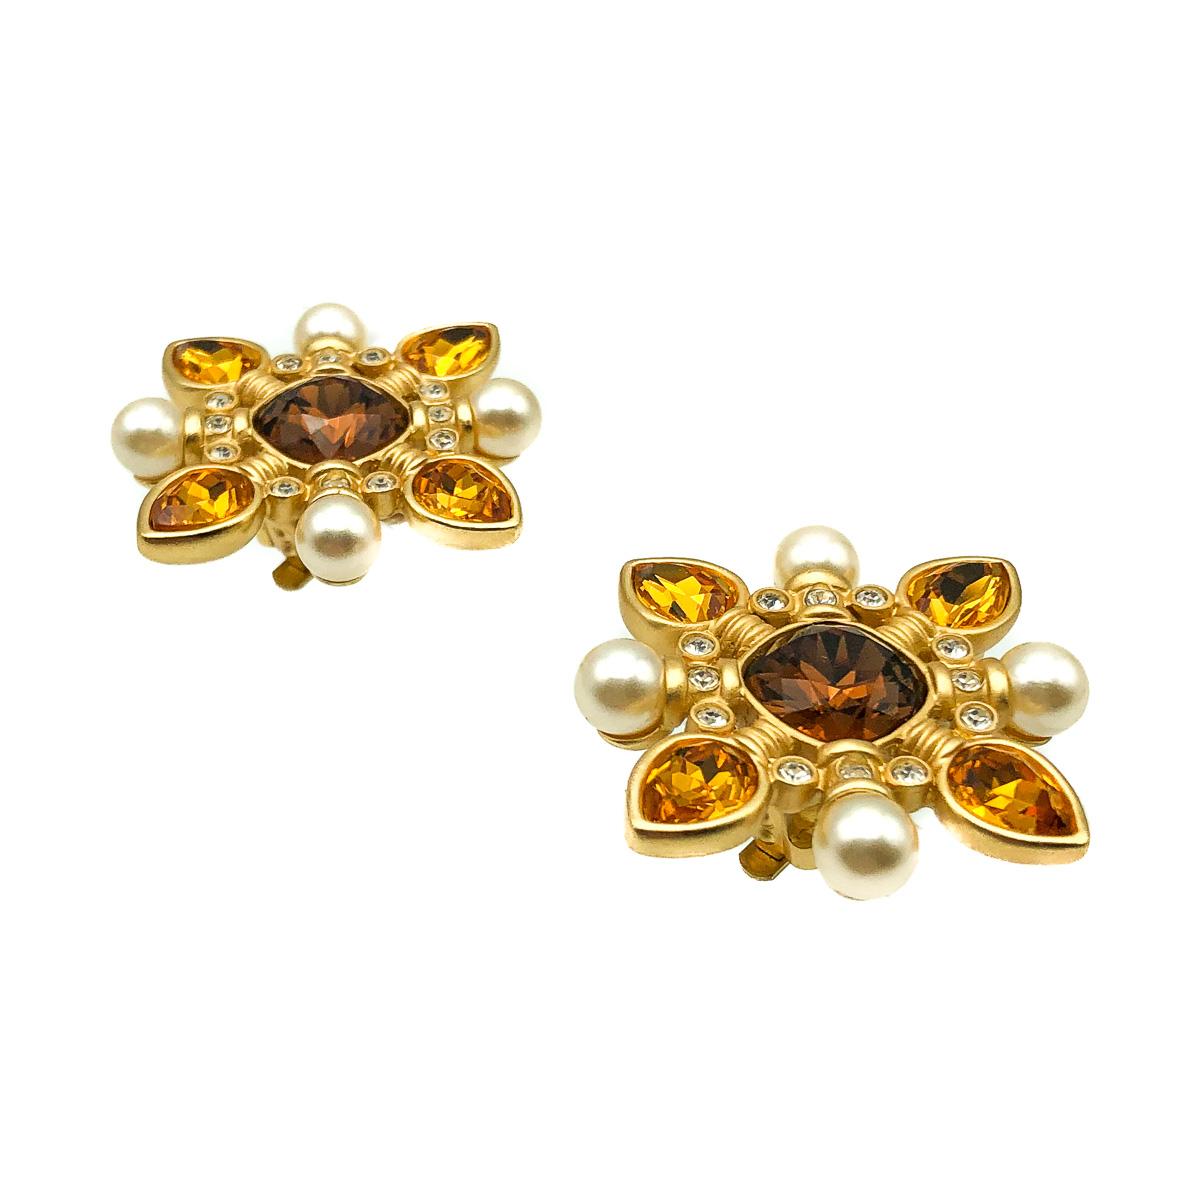 A pair of richly coloured Vintage Swarovski Cruciform Earrings dating to the 1980s. Featuring a cruciform style design centered around a large cushion shaped citrine crystal. Creamy whole pearls and tear drop citrine crystals form a delightful